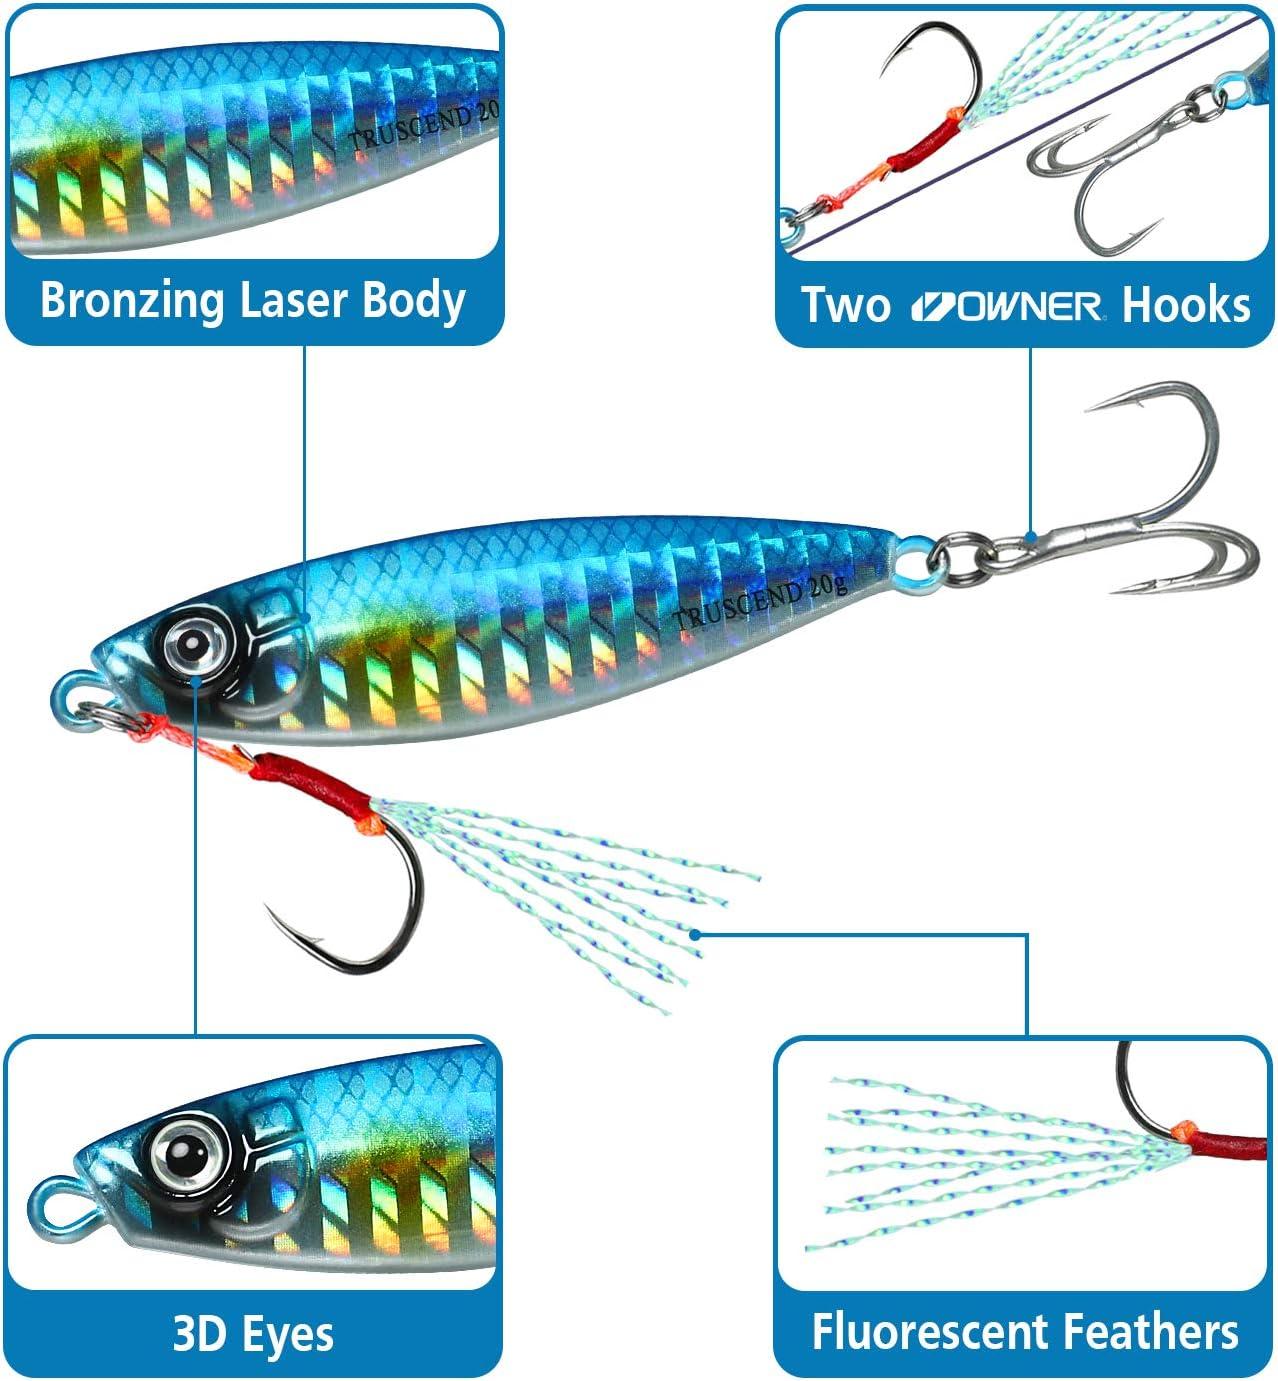 TRUSCEND Saltwater Jigs Fishing Lures 10g-160g with Flat BKK Hooks, Slow  Pitch/Knife/Vertical Jigs, Saltwater Spoon Lure for Tuna Salmon Grouper,  Sea Fishing Jigging Lure, Blade Bait for Bass Fishing F3-2.4-0.7oz